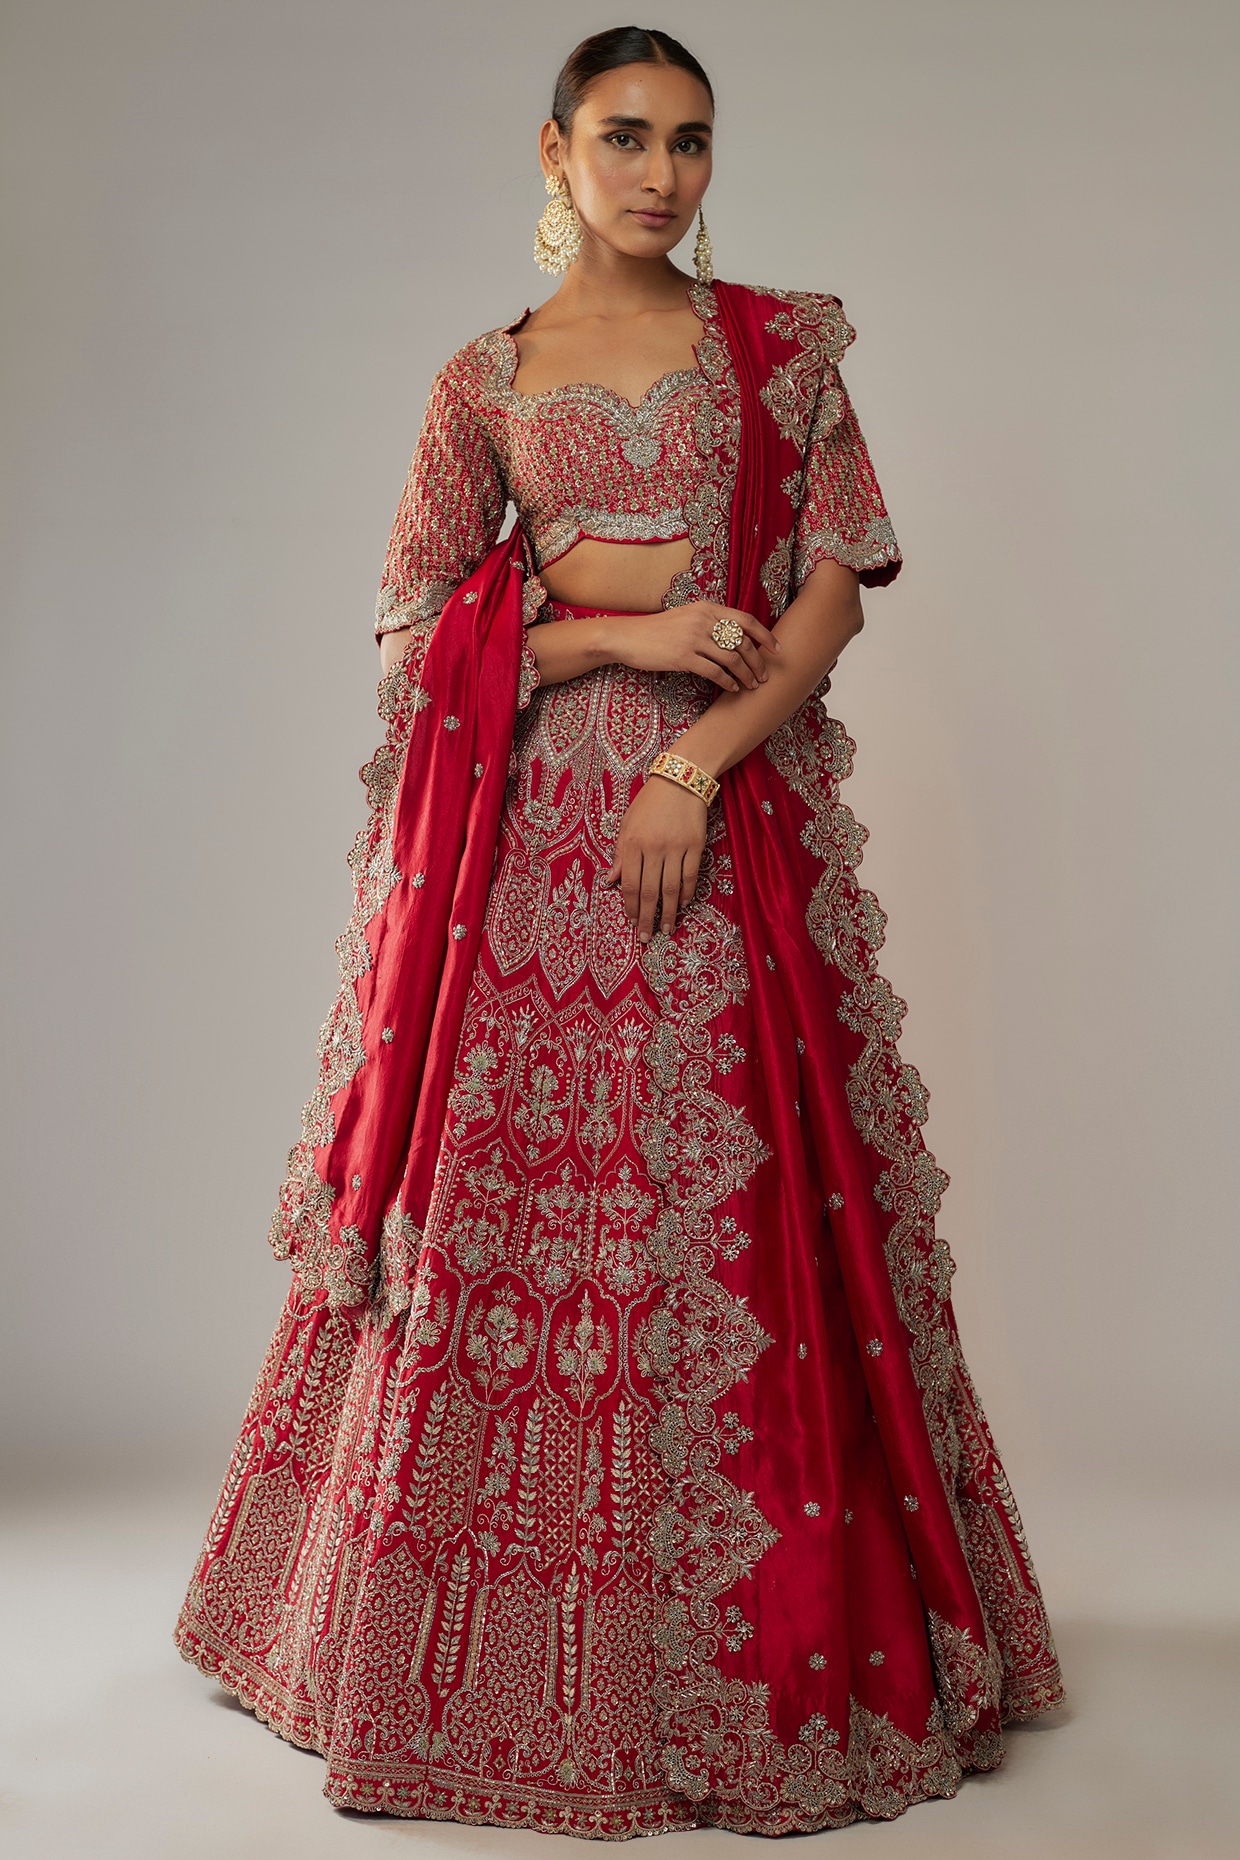 Stunning Indian Bridal Collections By Jayanti Reddy | Batas indianas,  Looks, Moda indiana